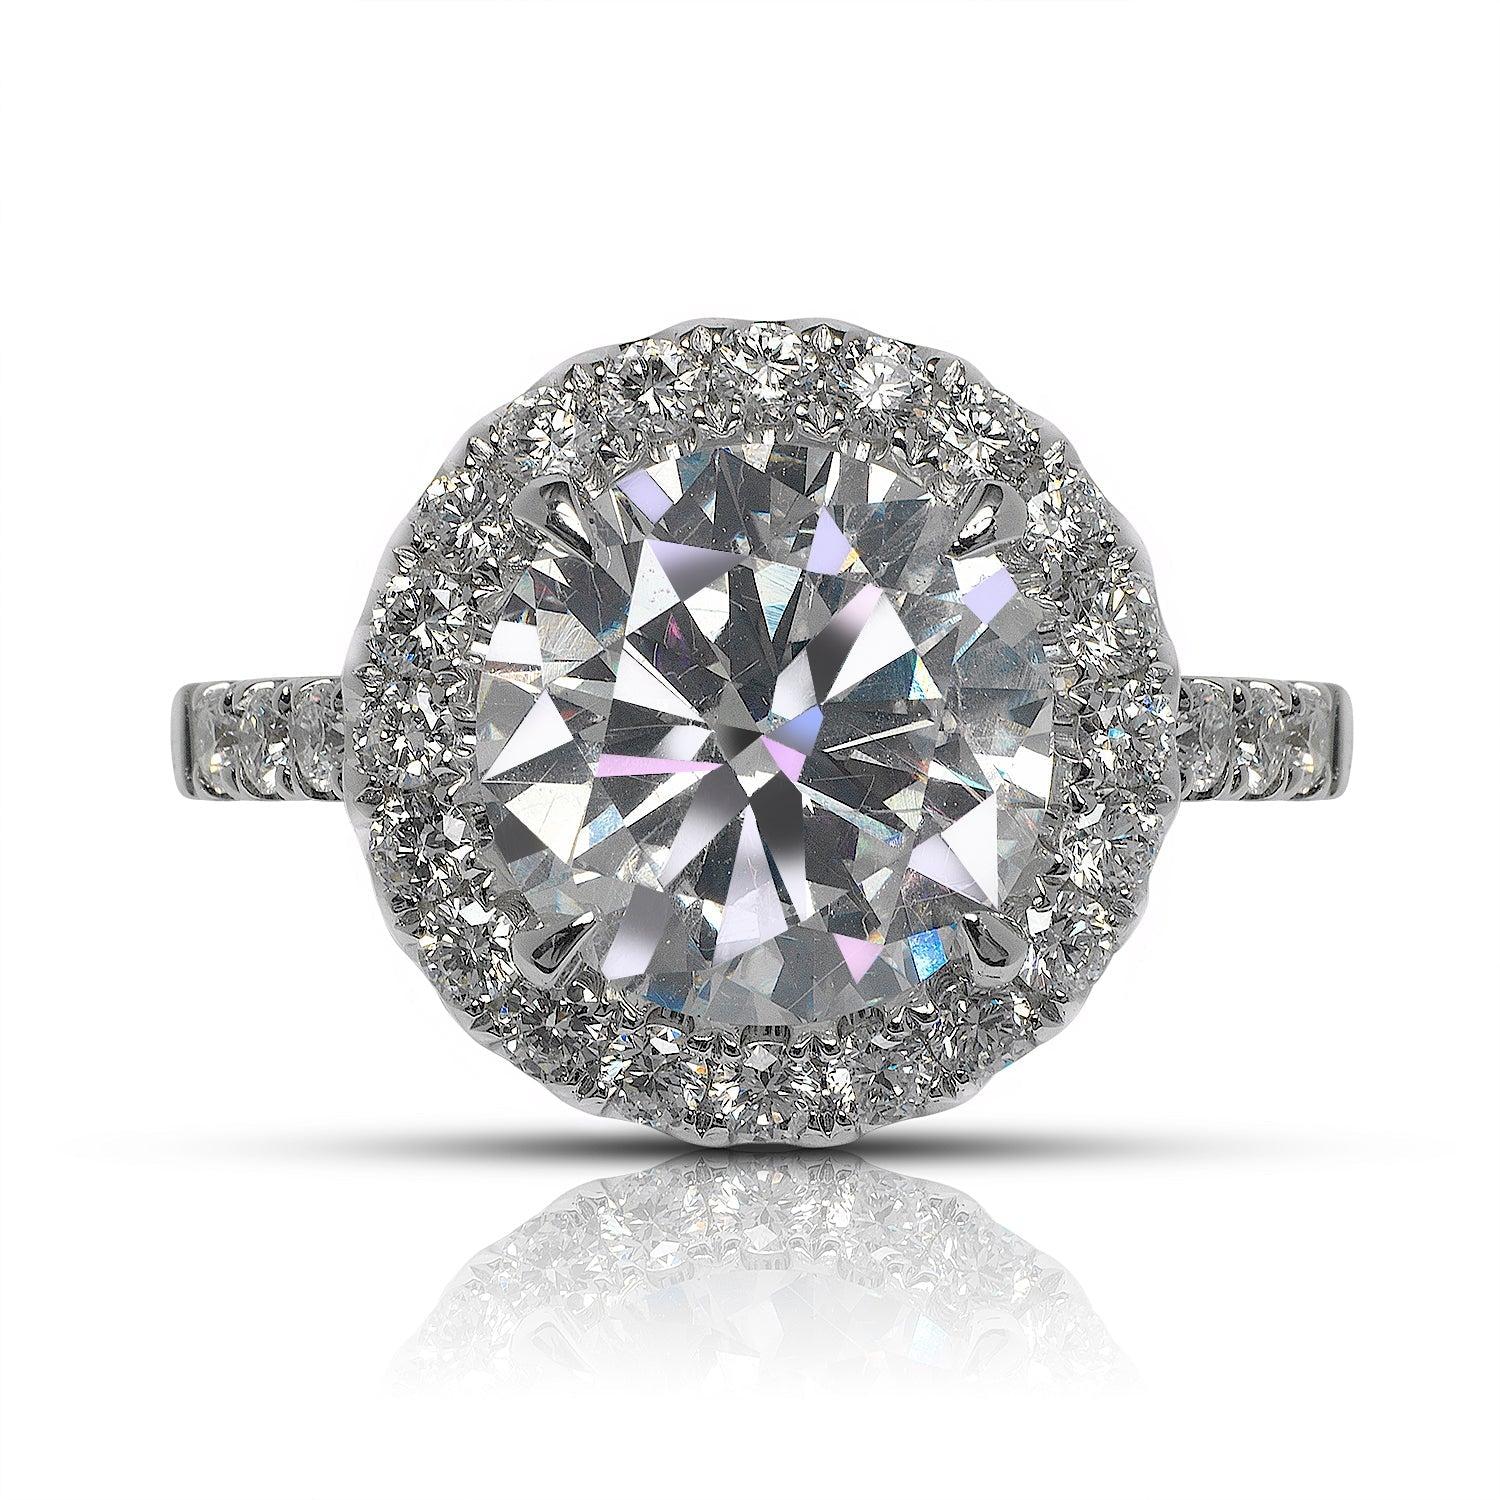 ZETA HALO DIAMOND ENGAGEMENT RING 18K WHITE GOLD 


CERTIFIED
Center Diamond
Carat Weight: 3.6 Carats
Color :   E
Clarity:  VS2*
Cut: ROUND BRILLIANT
Measurements: 9.8 x 9.8 x 5.8 mm
*Clarity Enhanced

Ring:
Metal: 18K WHITE GOLD
Style: HALO RING